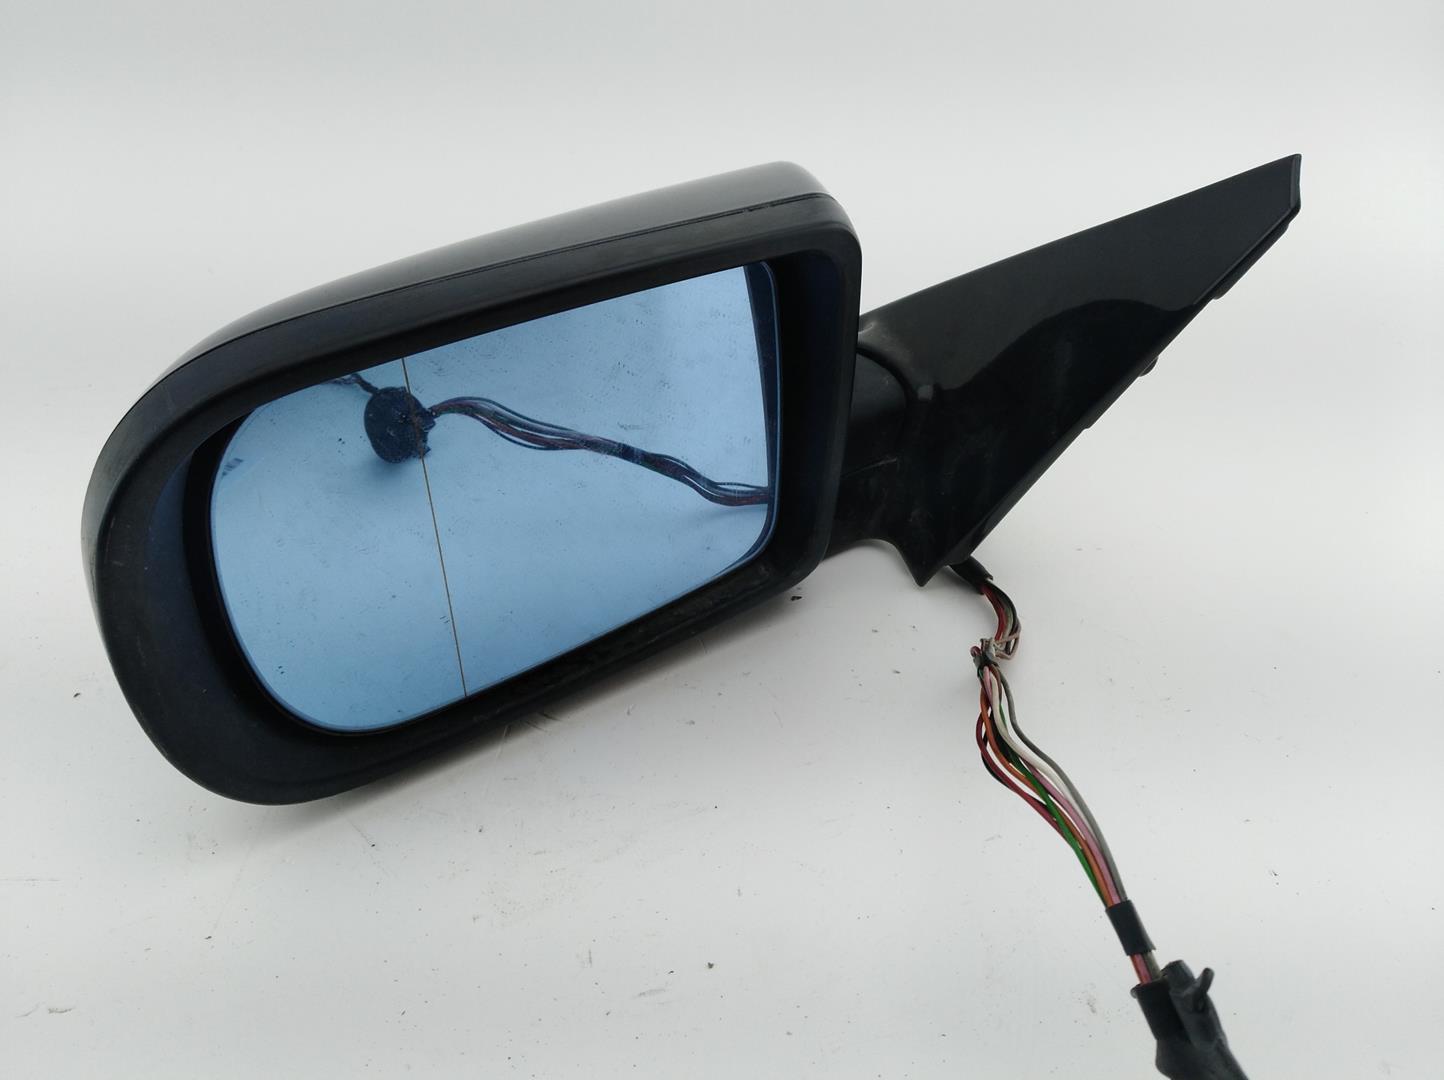 BMW 7 Series E38 (1994-2001) Left Side Wing Mirror 51168266431, 51168266431, 51168266431 24666161